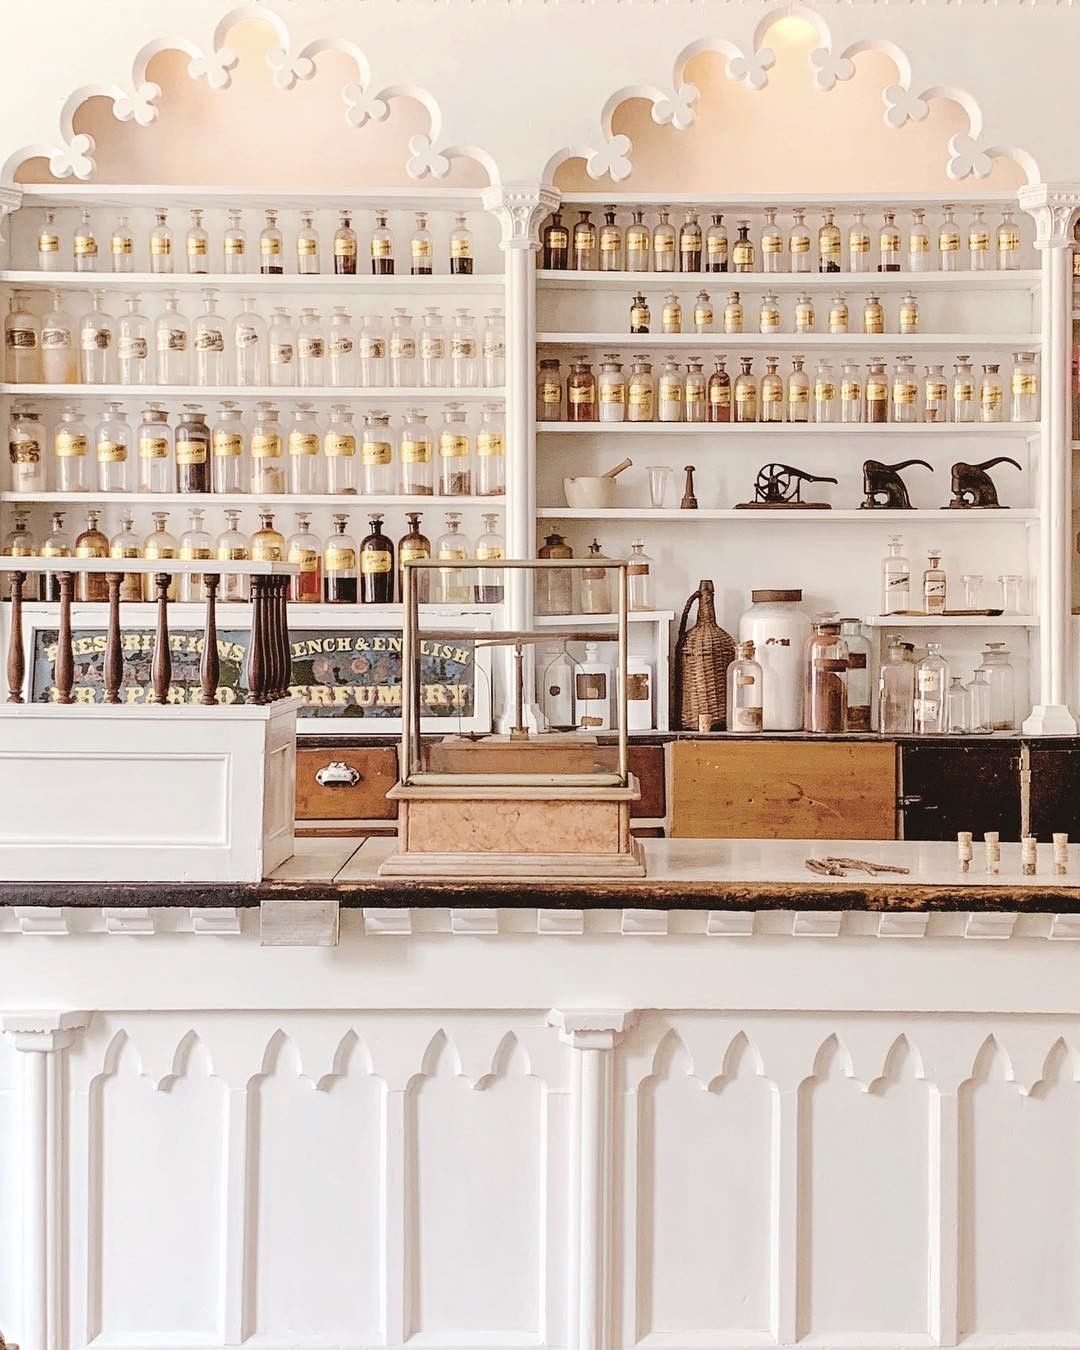 Museum with white walls and old medicine bottles. Photo by Instagram user @skylar_arias_adventures